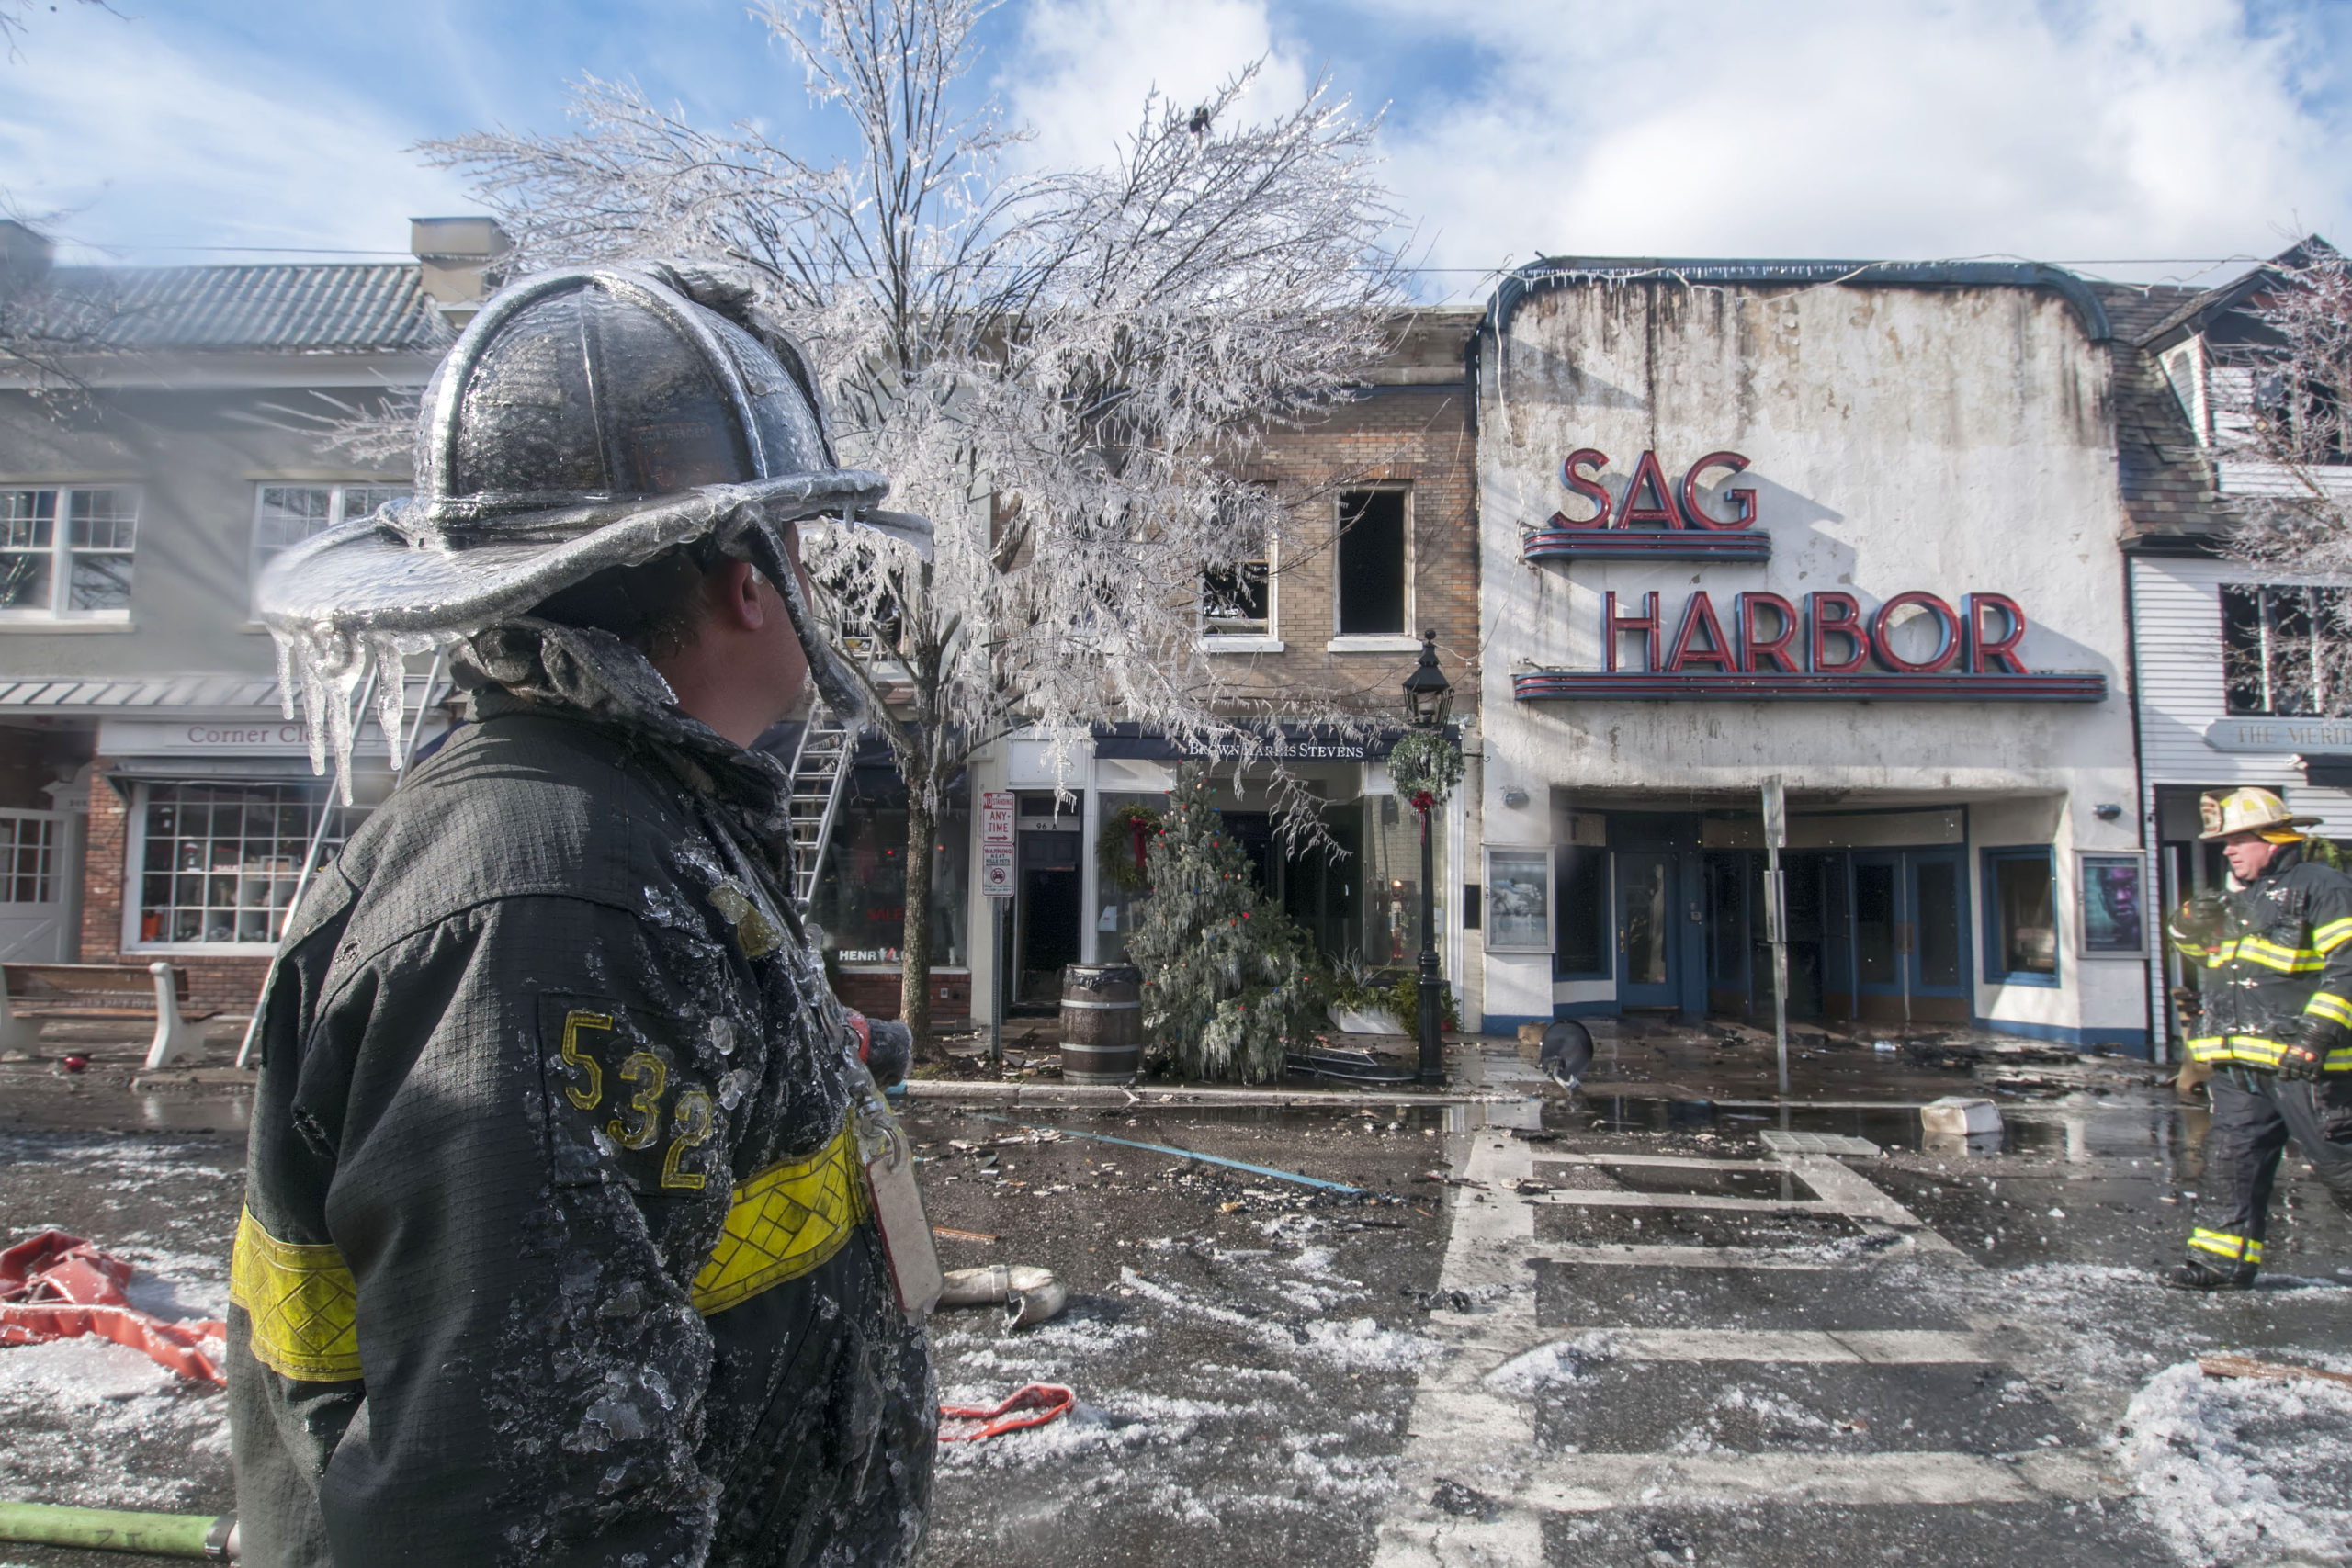 The aftermath of the Sag Harbor Cinema fire on December 16, 2016.